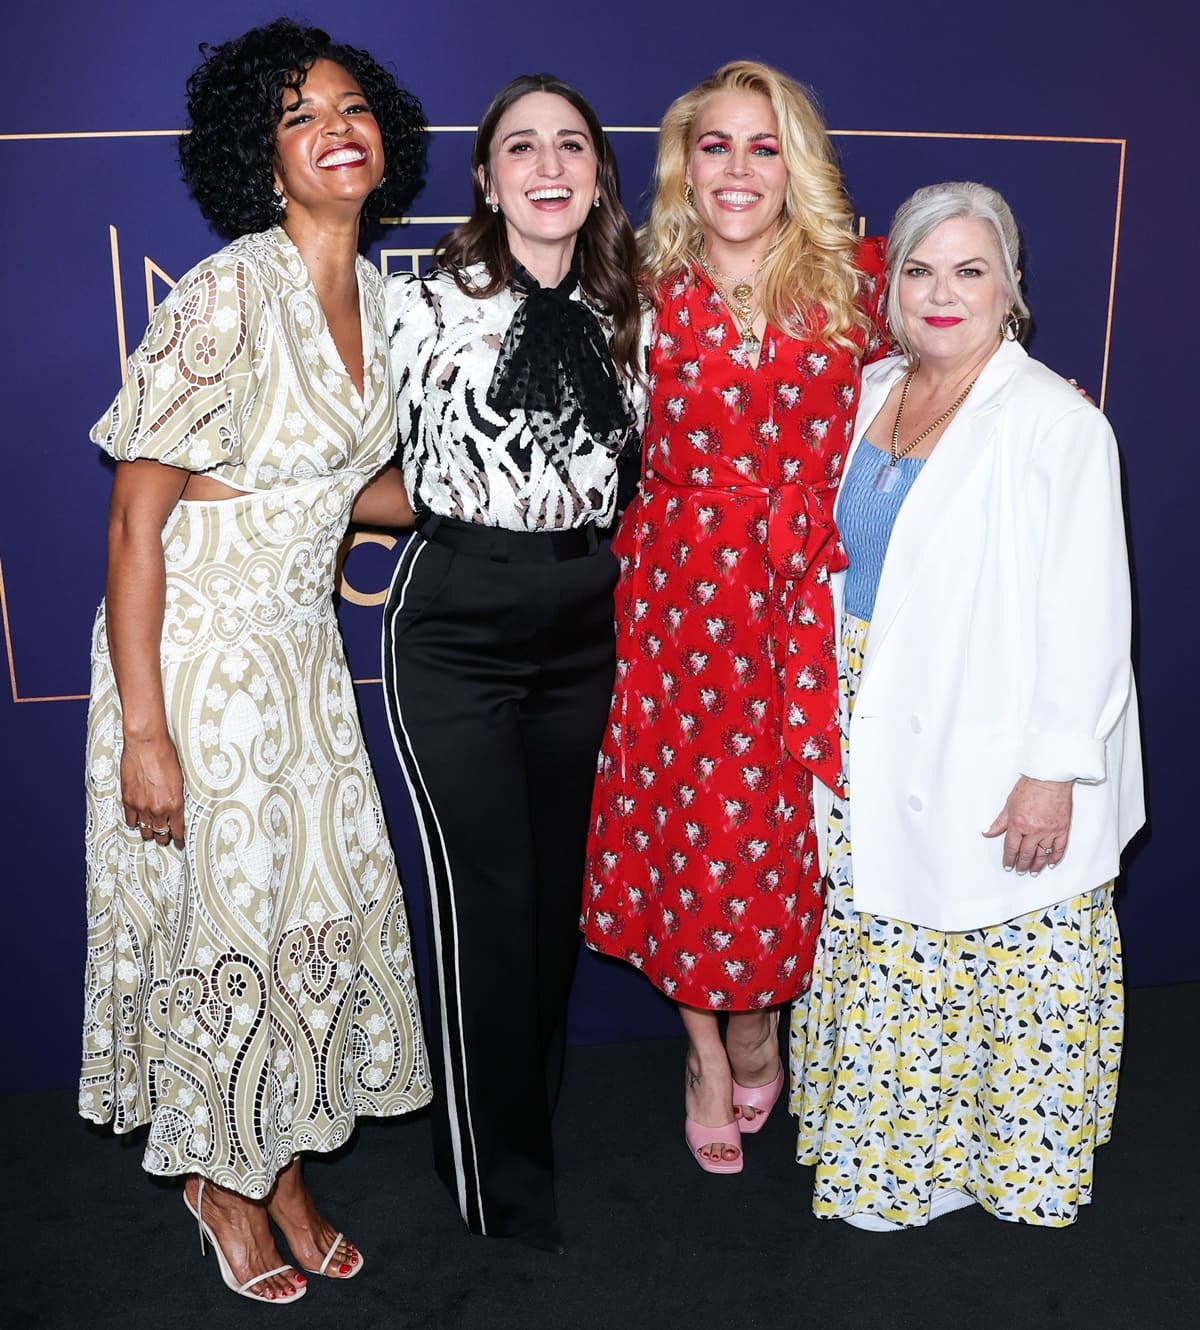 In terms of height, Renée Elise Goldsberry is the tallest at 5 feet 7 inches (170.2 cm), followed by Busy Philipps at 5 feet 6 ¼ inches (168.3 cm), Sara Bareilles at 5 feet 4 ¾ inches (164.5 cm), and Paula Pell being the shortest at 5 feet 1 inch (154.9 cm)